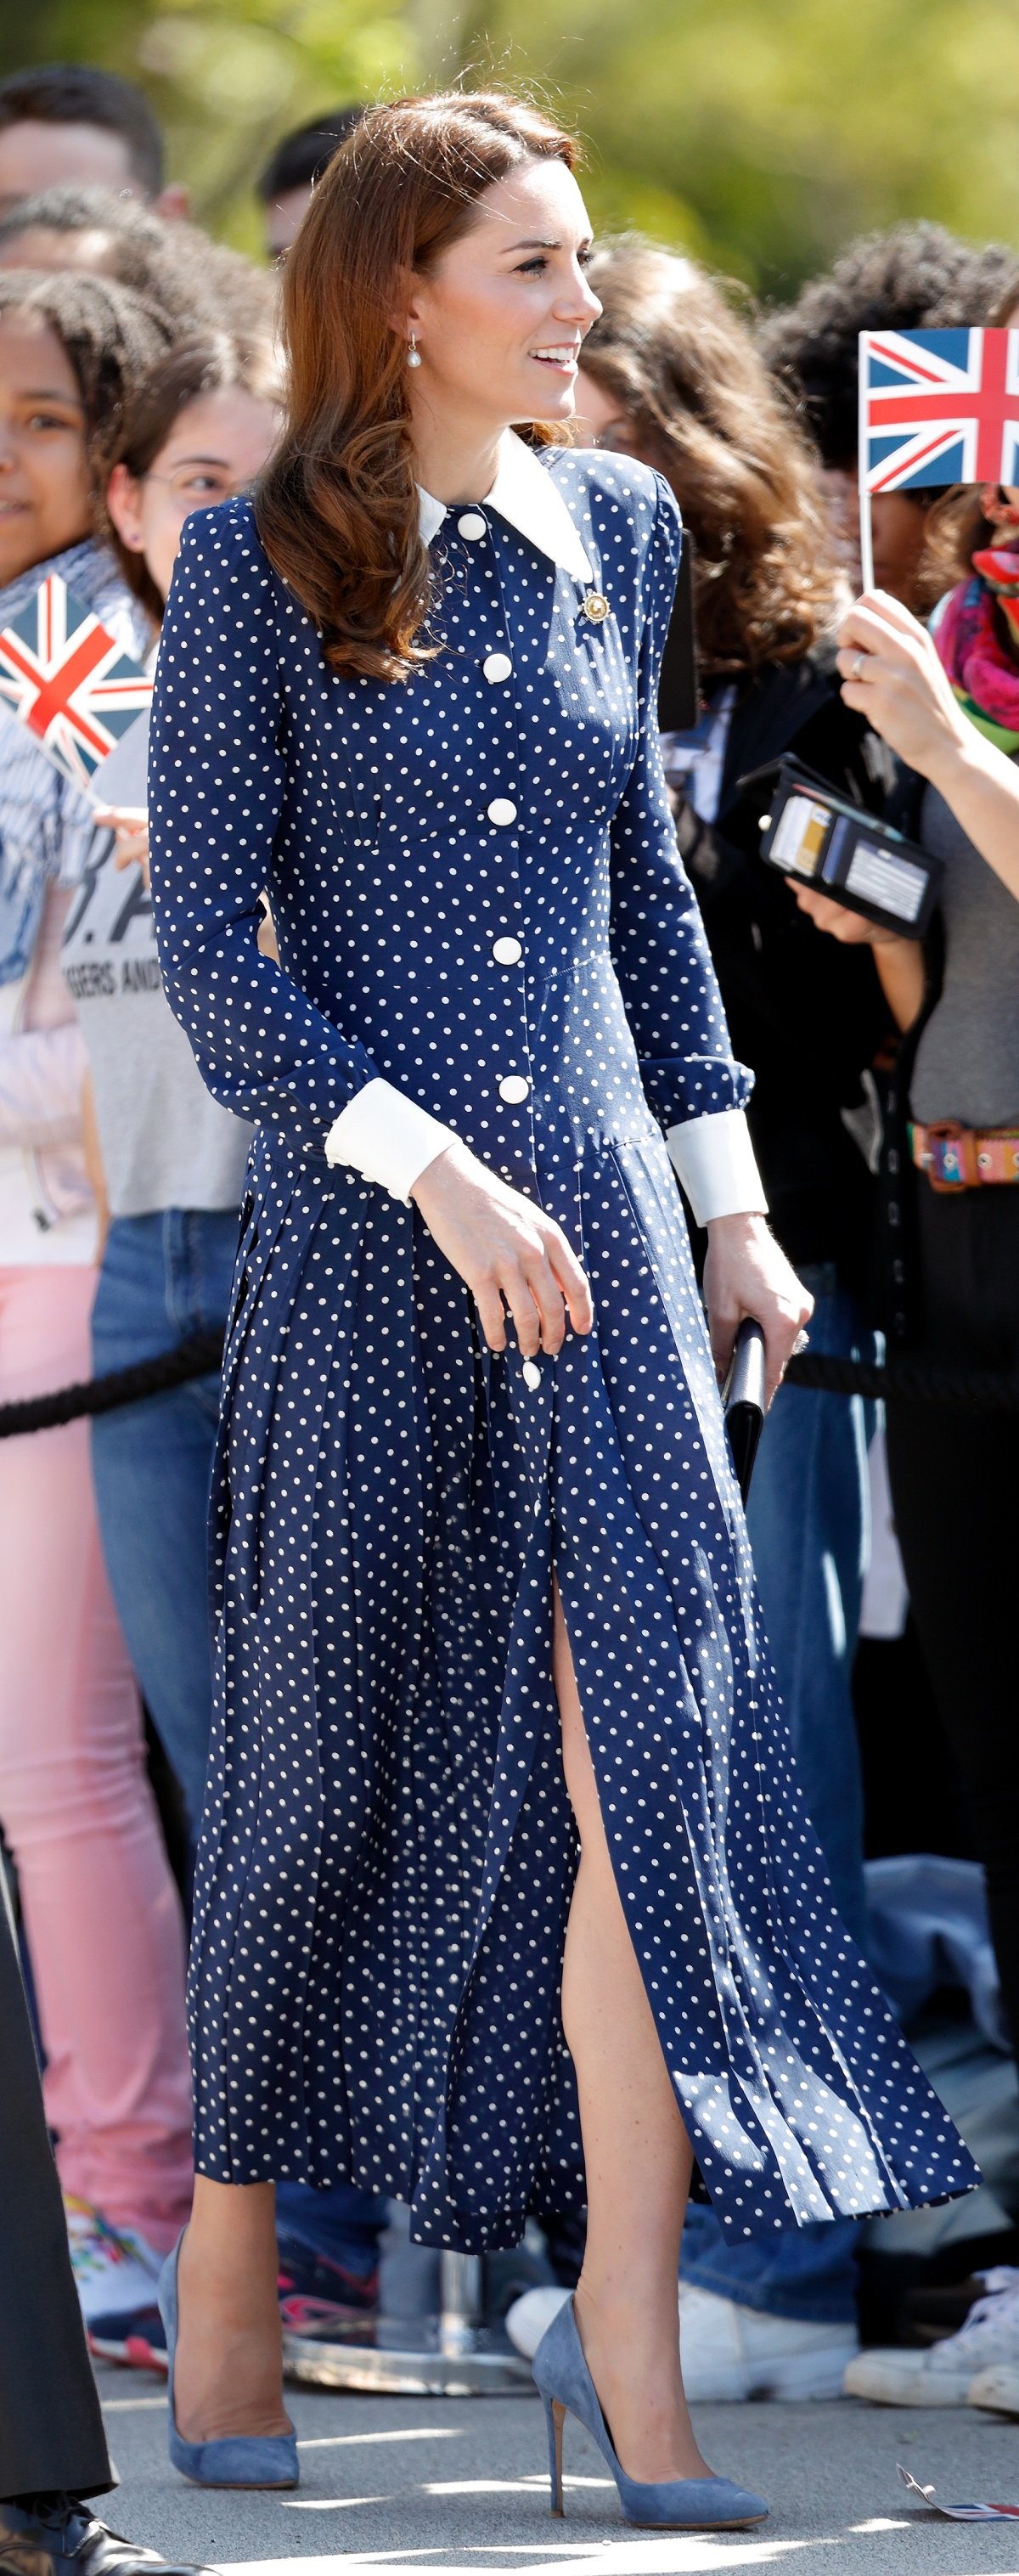 Kate Middleton wearing a long polka dot dress as she meets members of the public at 'D-Day Interception, Intelligence, Invasion' exhibition